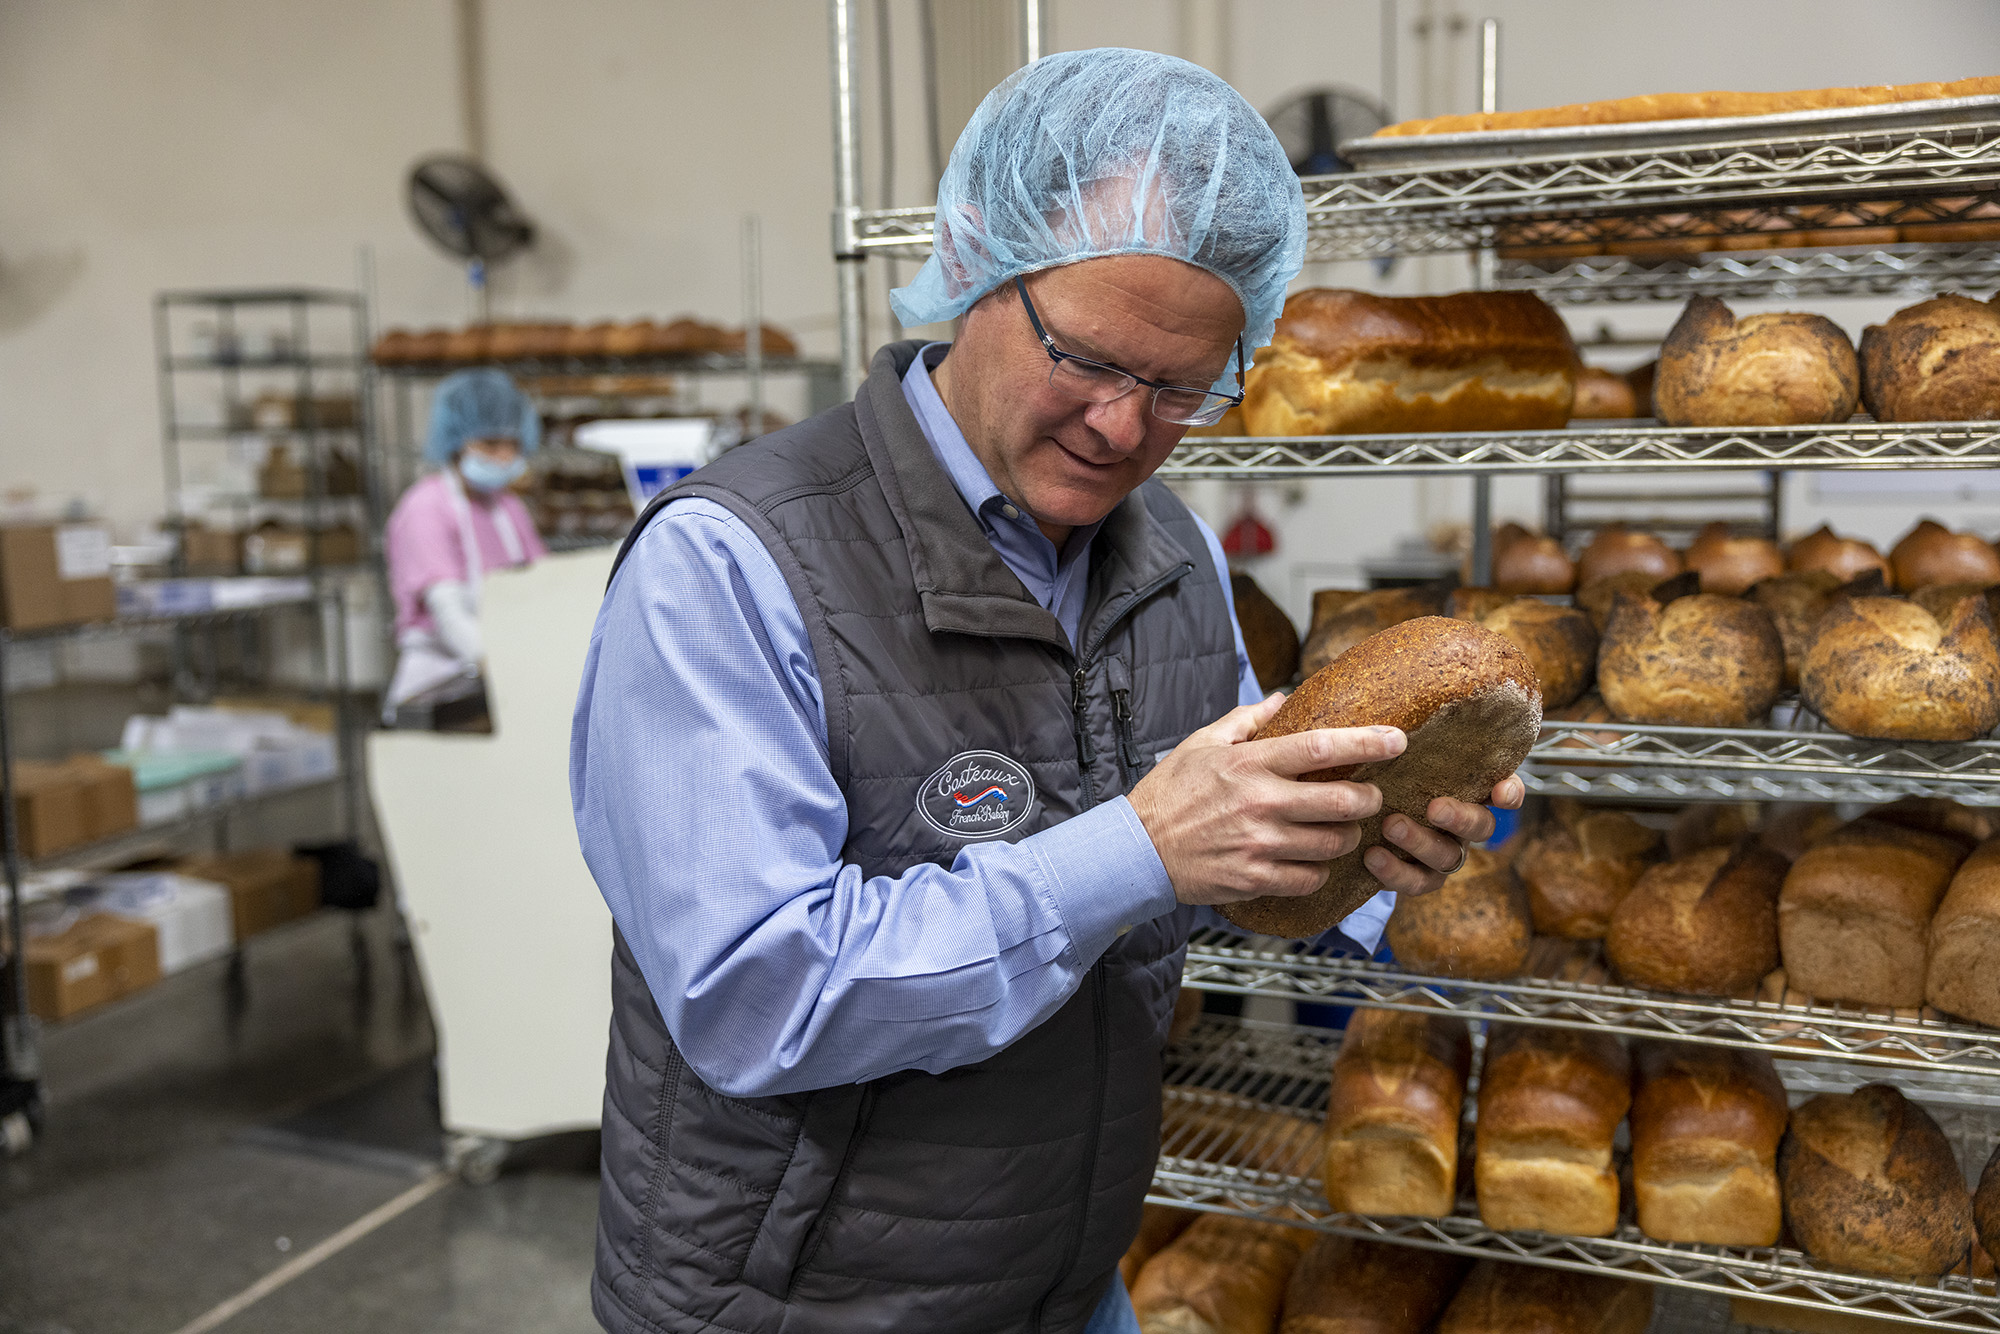 Costeaux French Bakery owner, Will Seppi, inspecting bread.